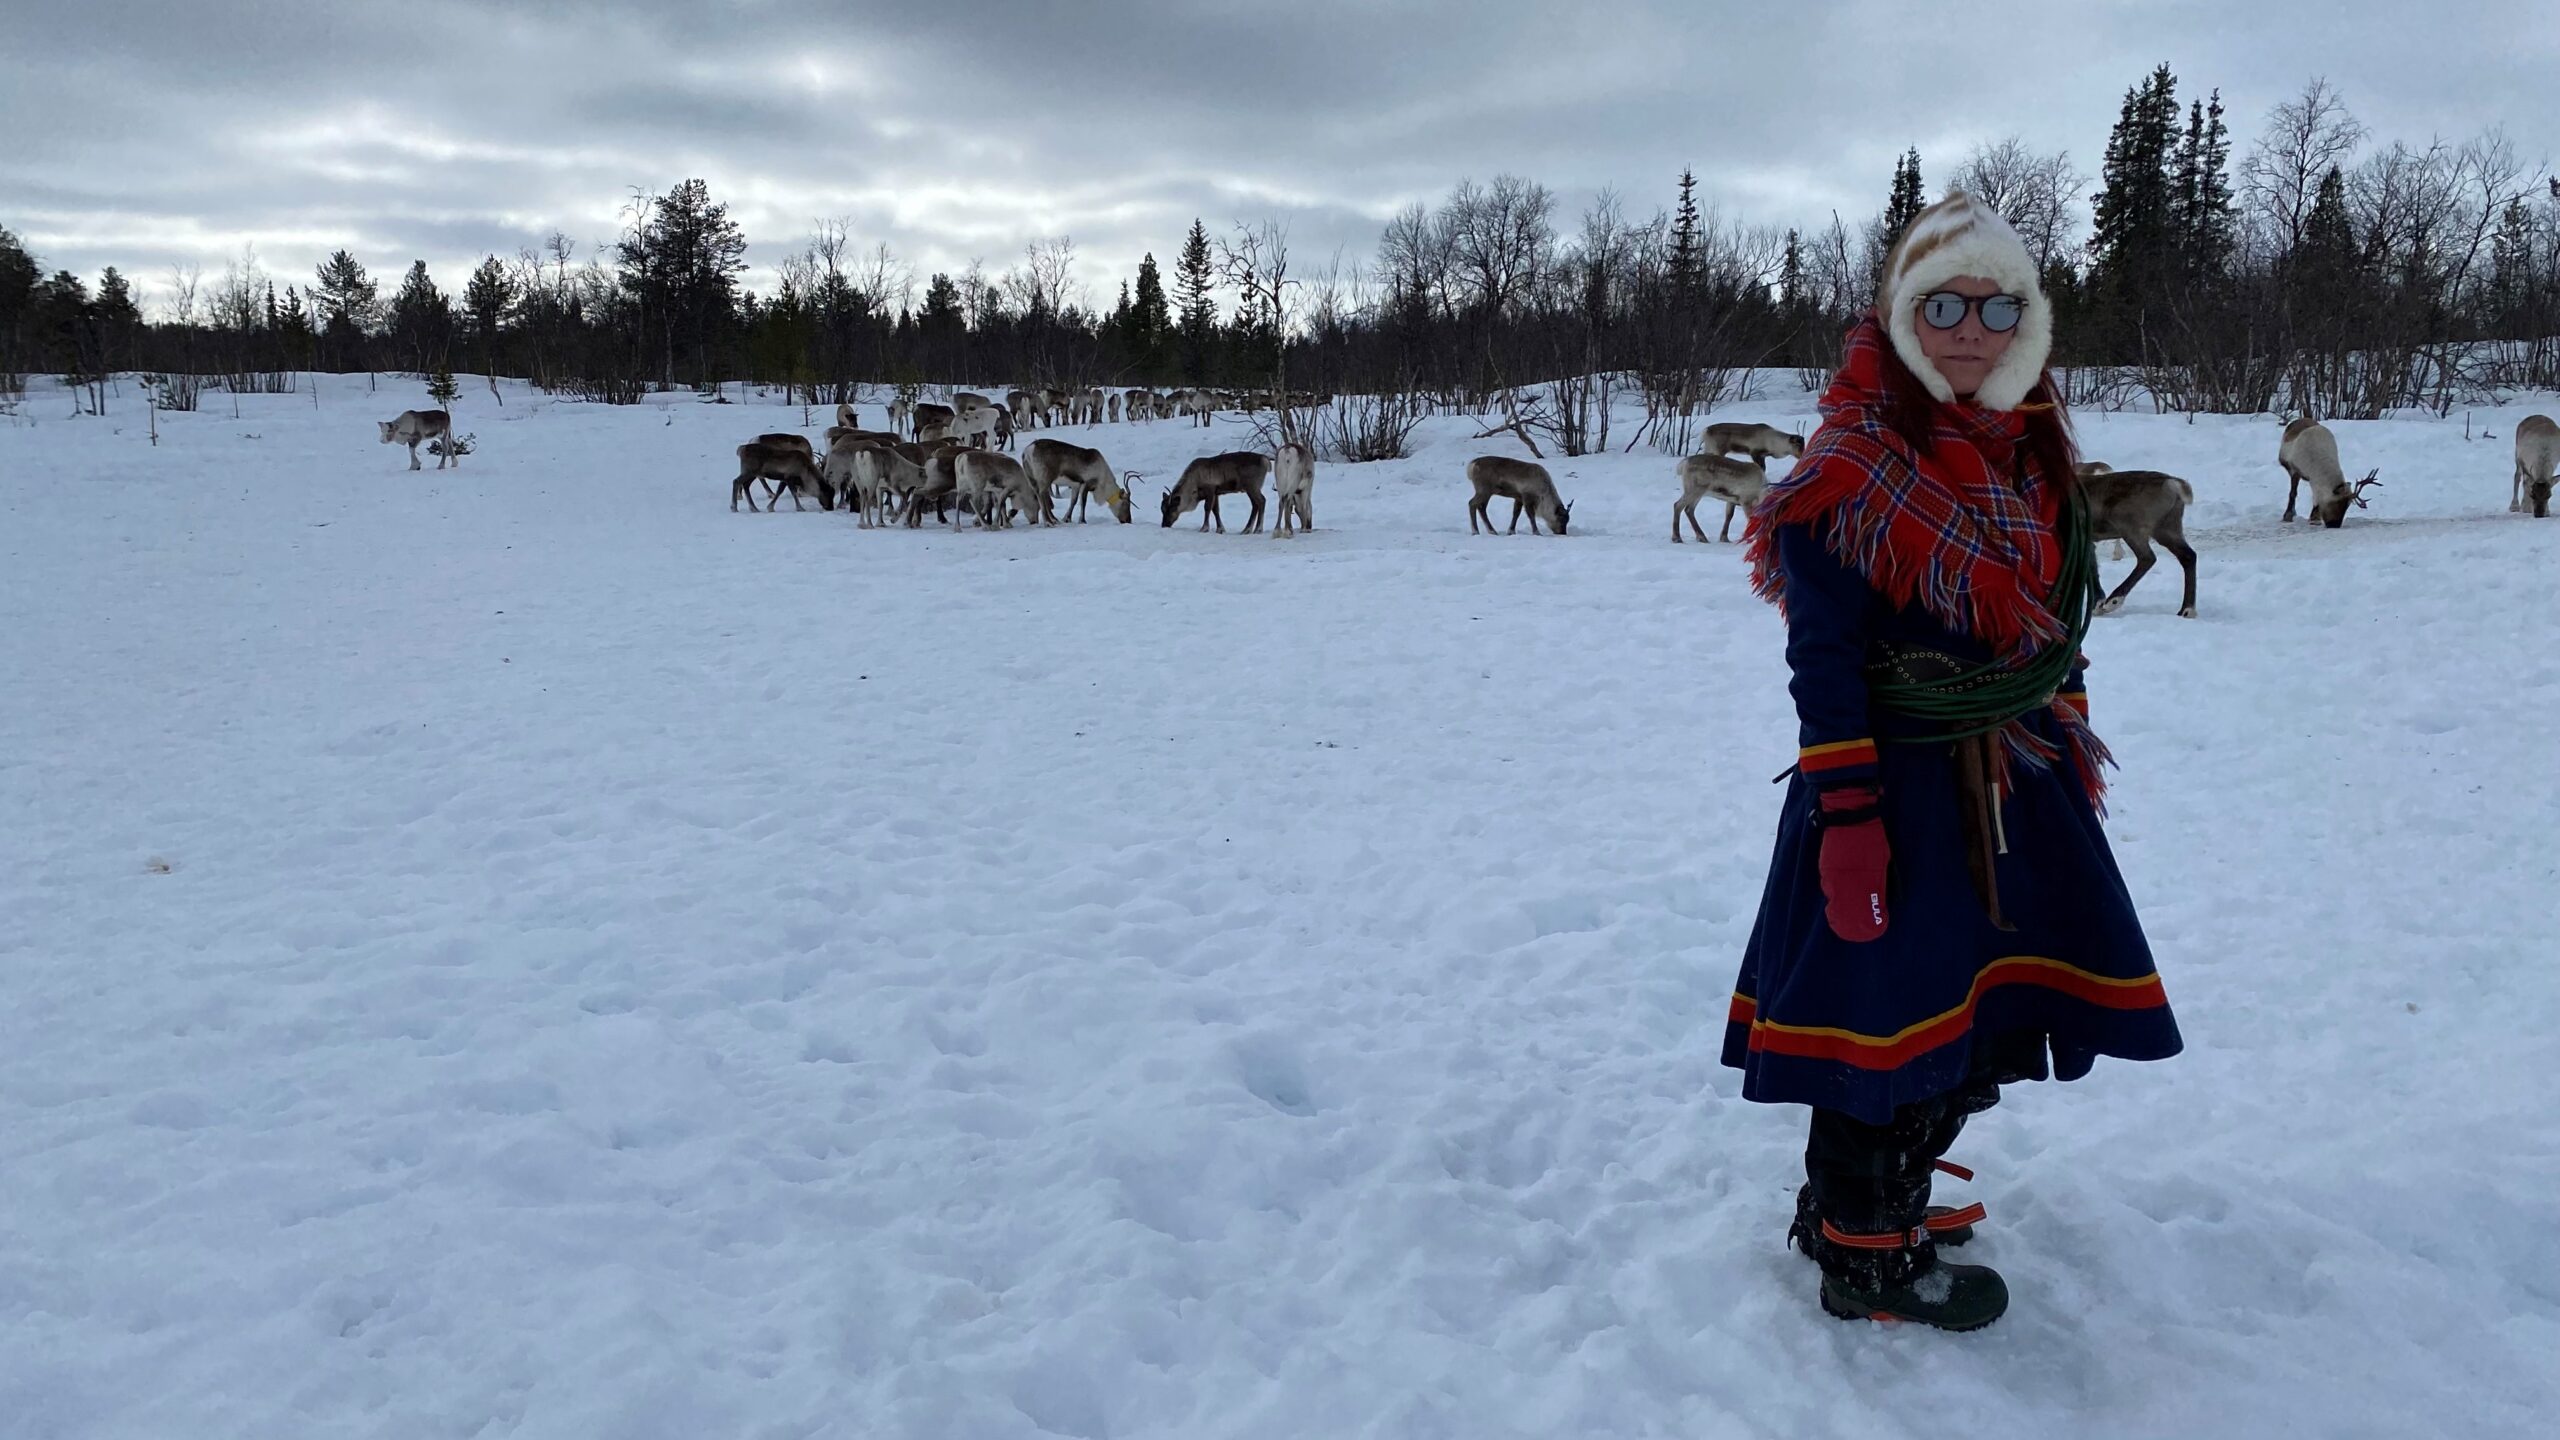 sami woman in traditional clothes surrounded by reindeer